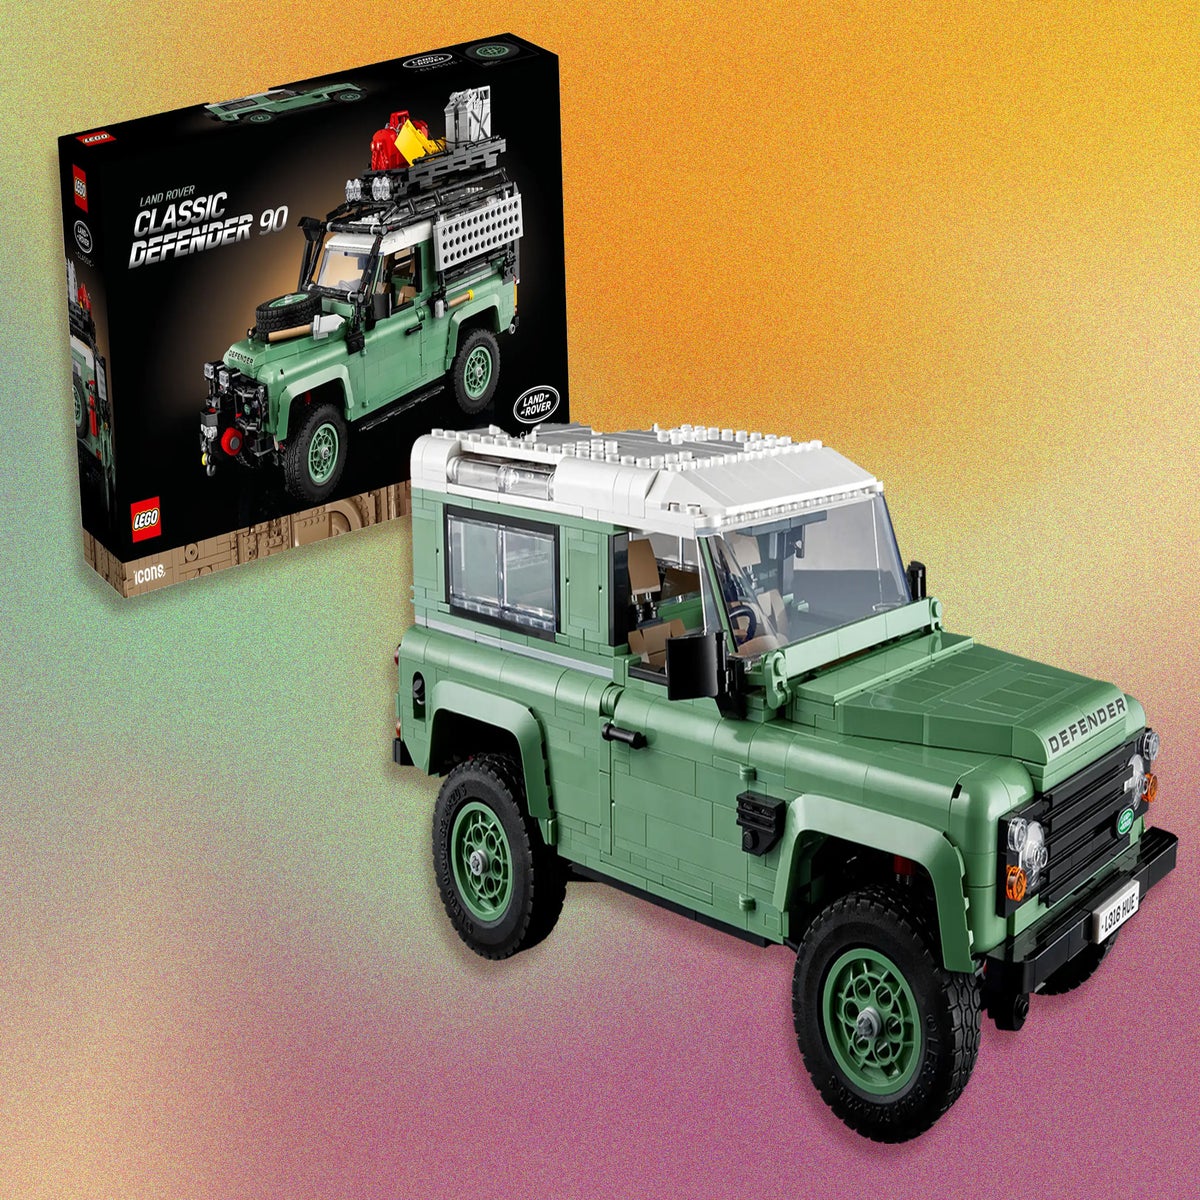 Lego's Land Rover classic defender 90 will take your collection up a gear